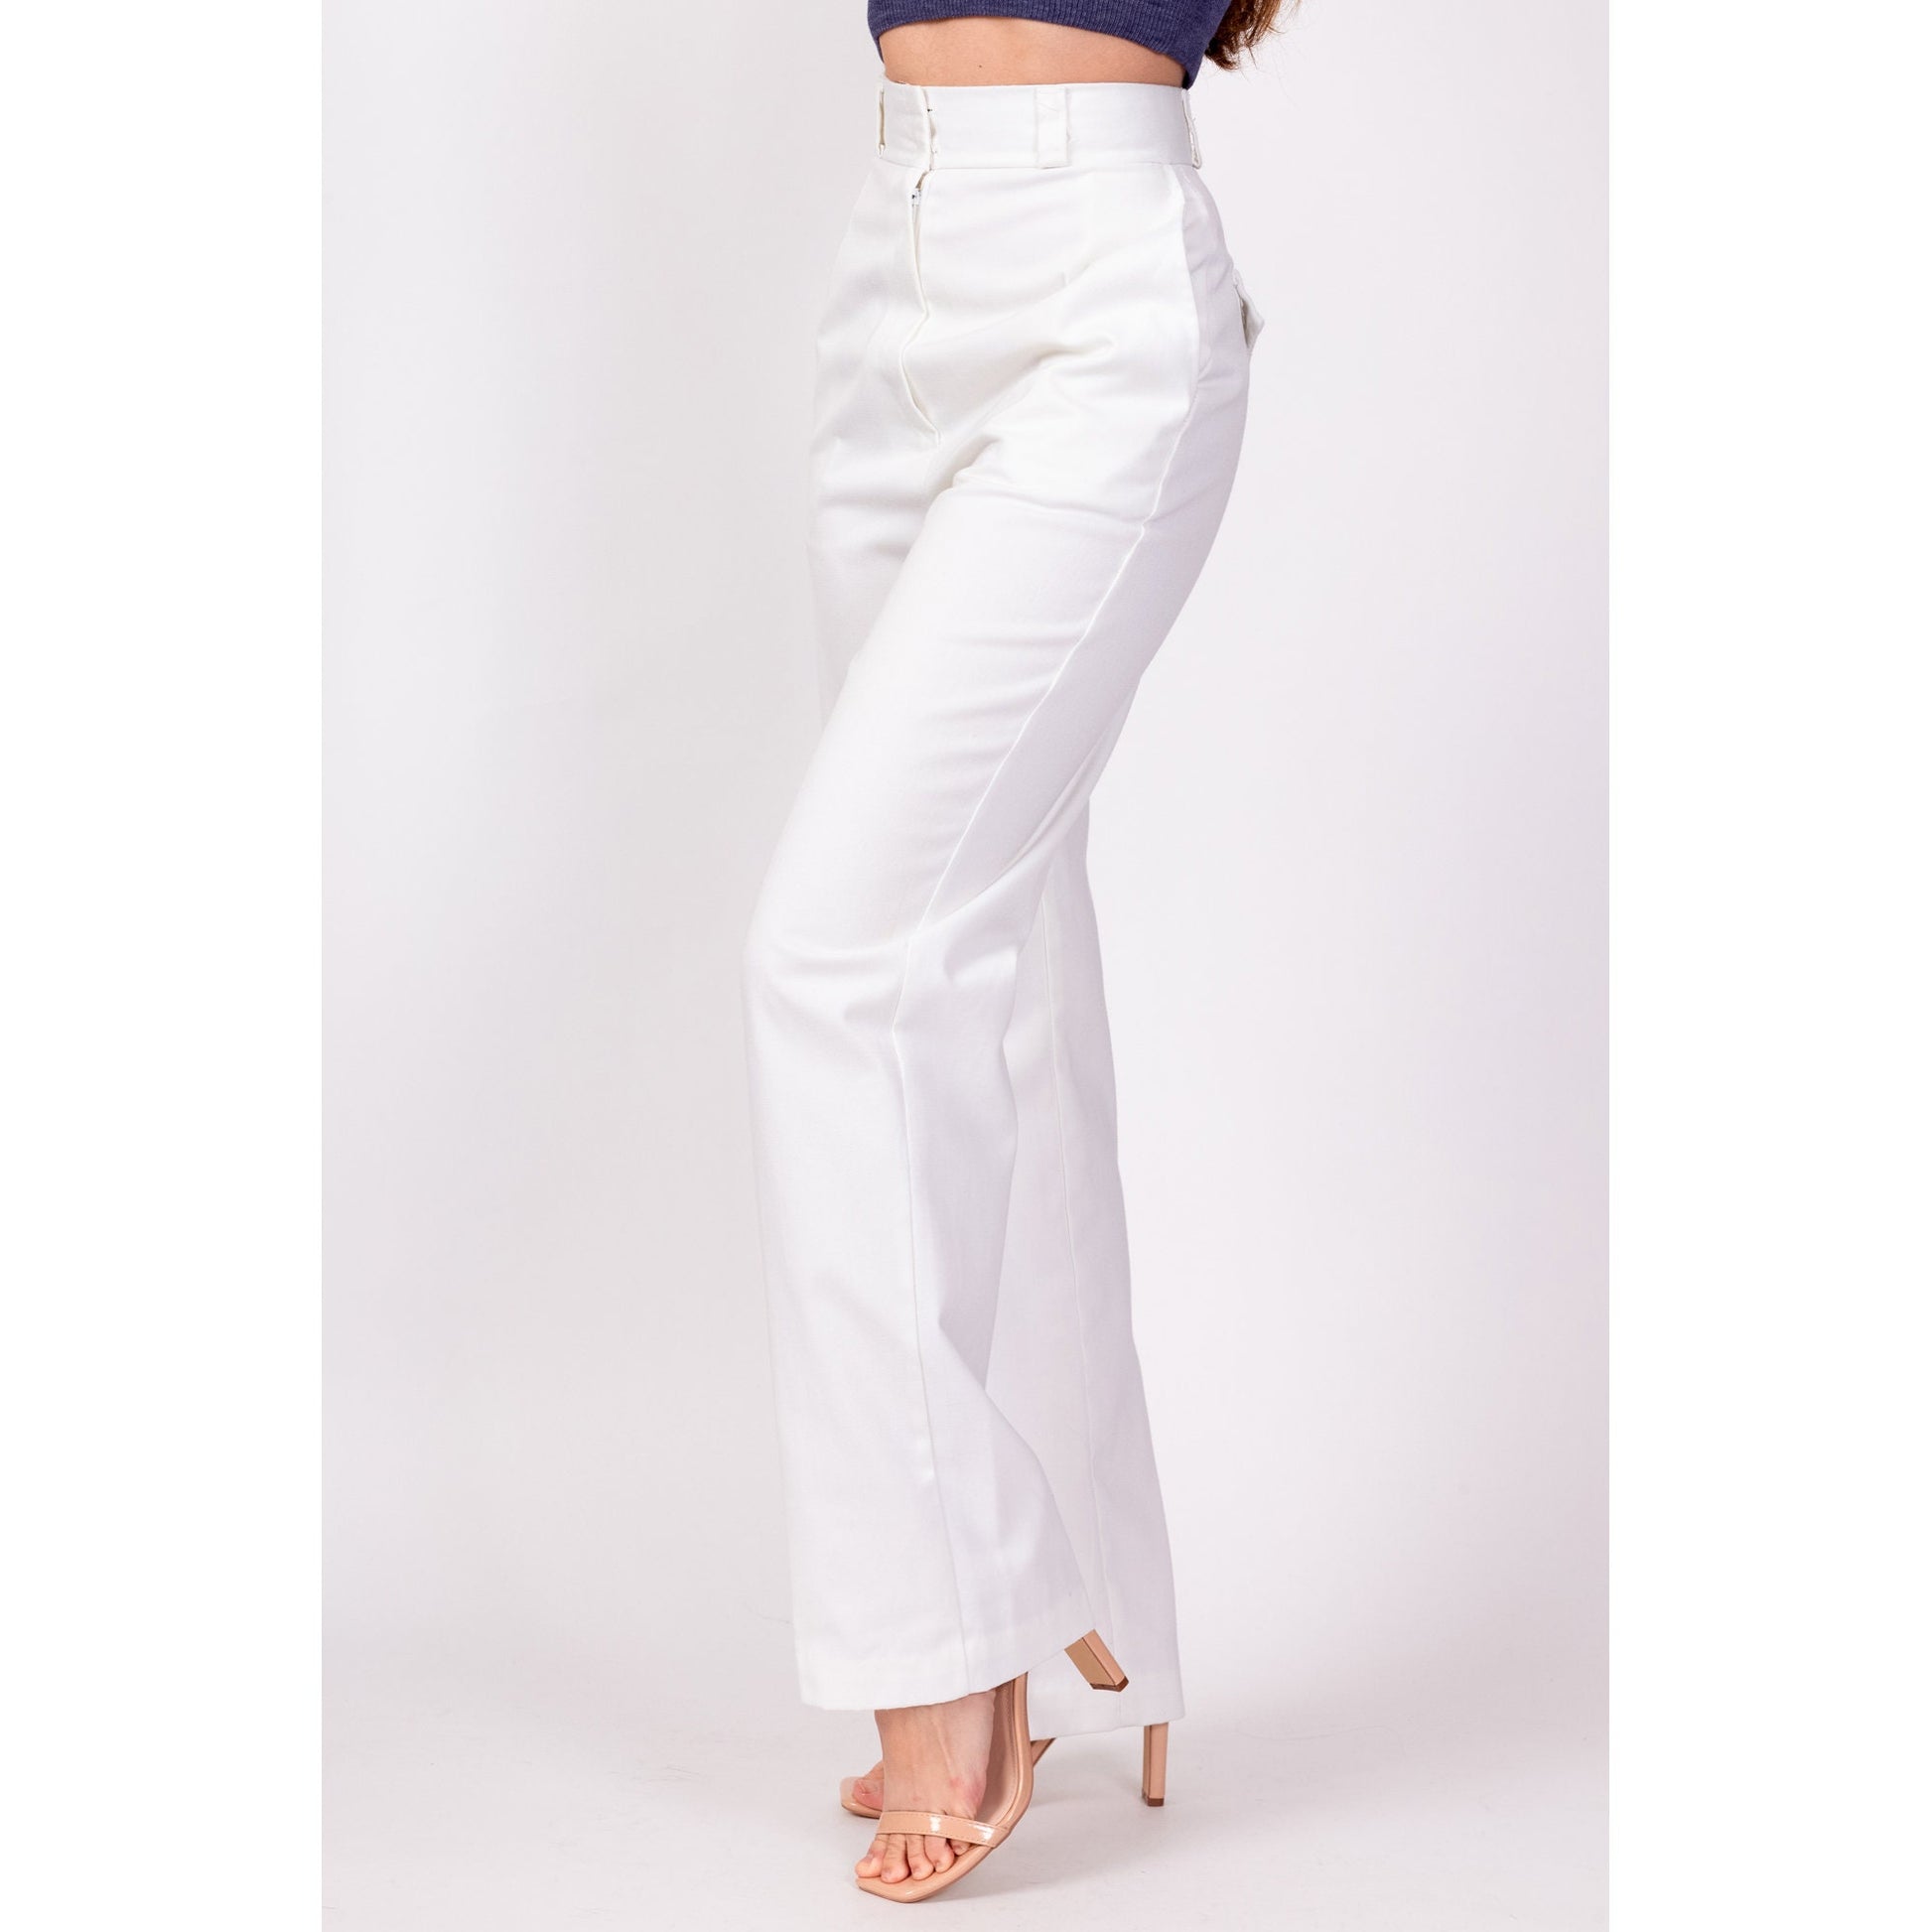 70s White High Waisted Trousers - Extra Small, 23.75 – Flying Apple Vintage